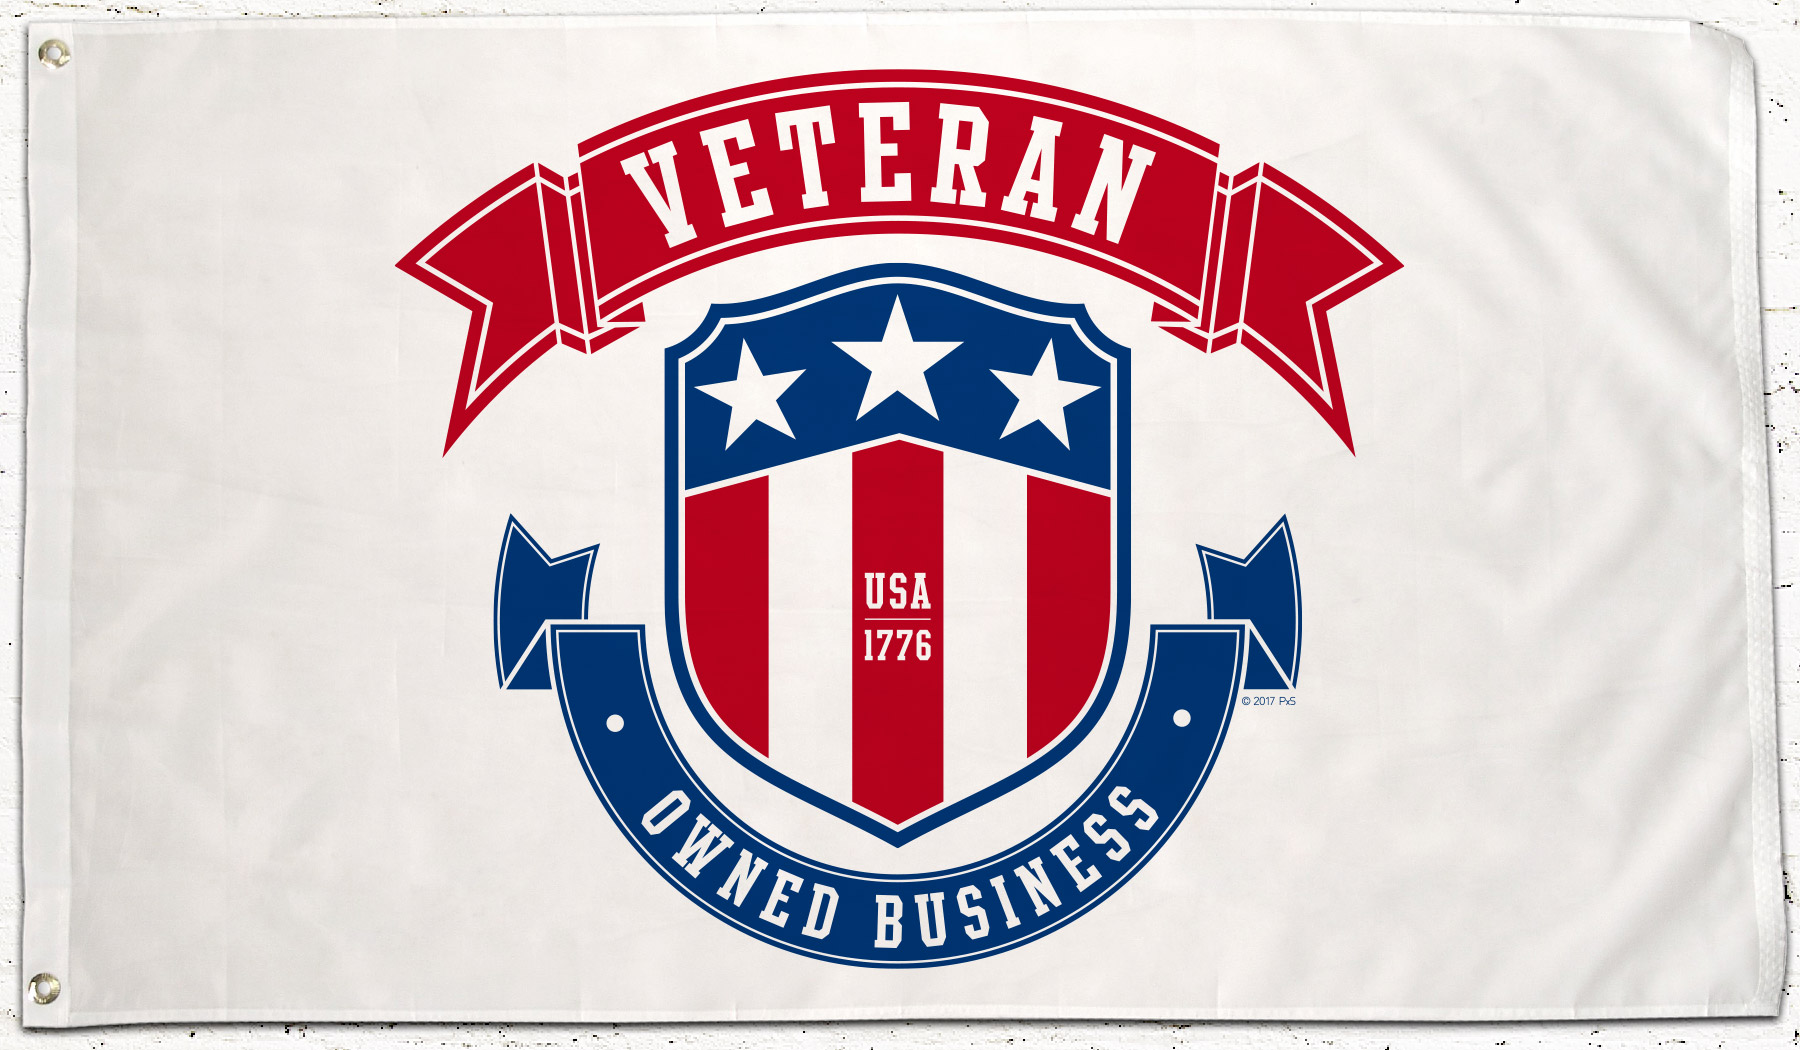 Veteran Owned Business flags